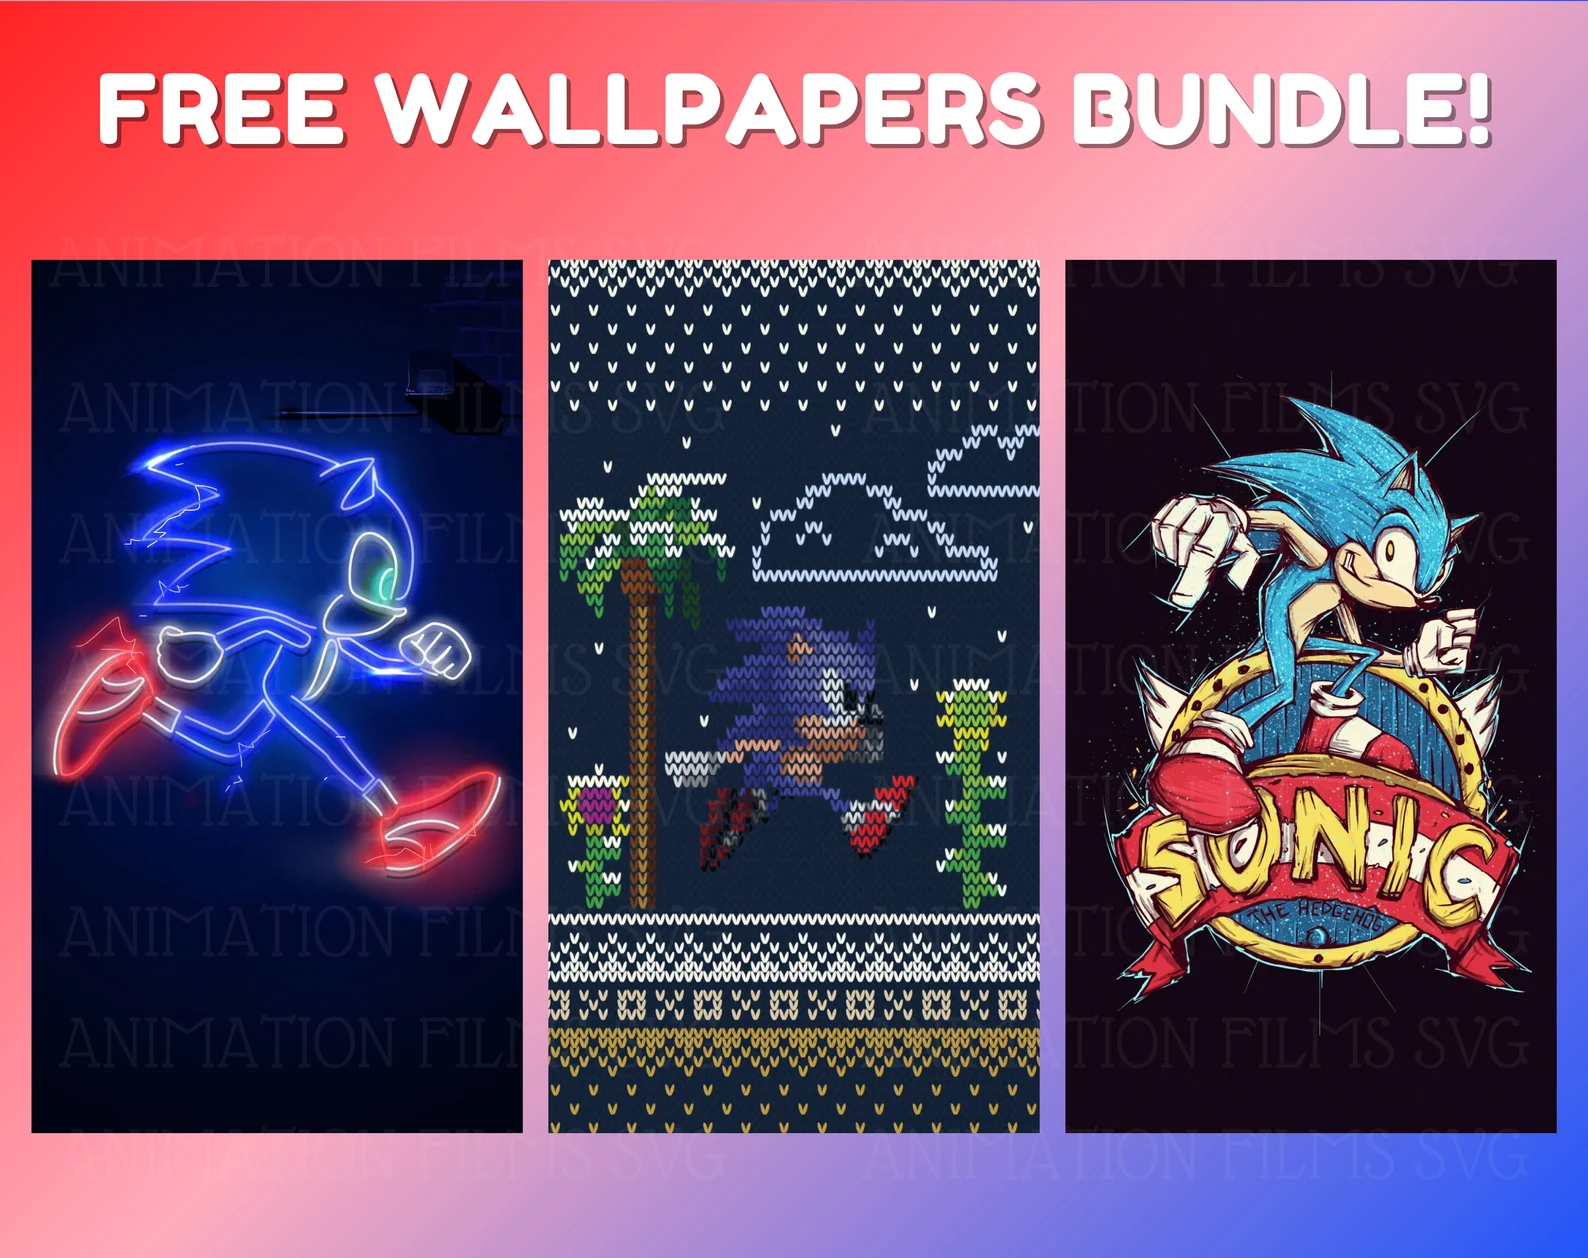 Nein free wallpapers bundle with Sonic.